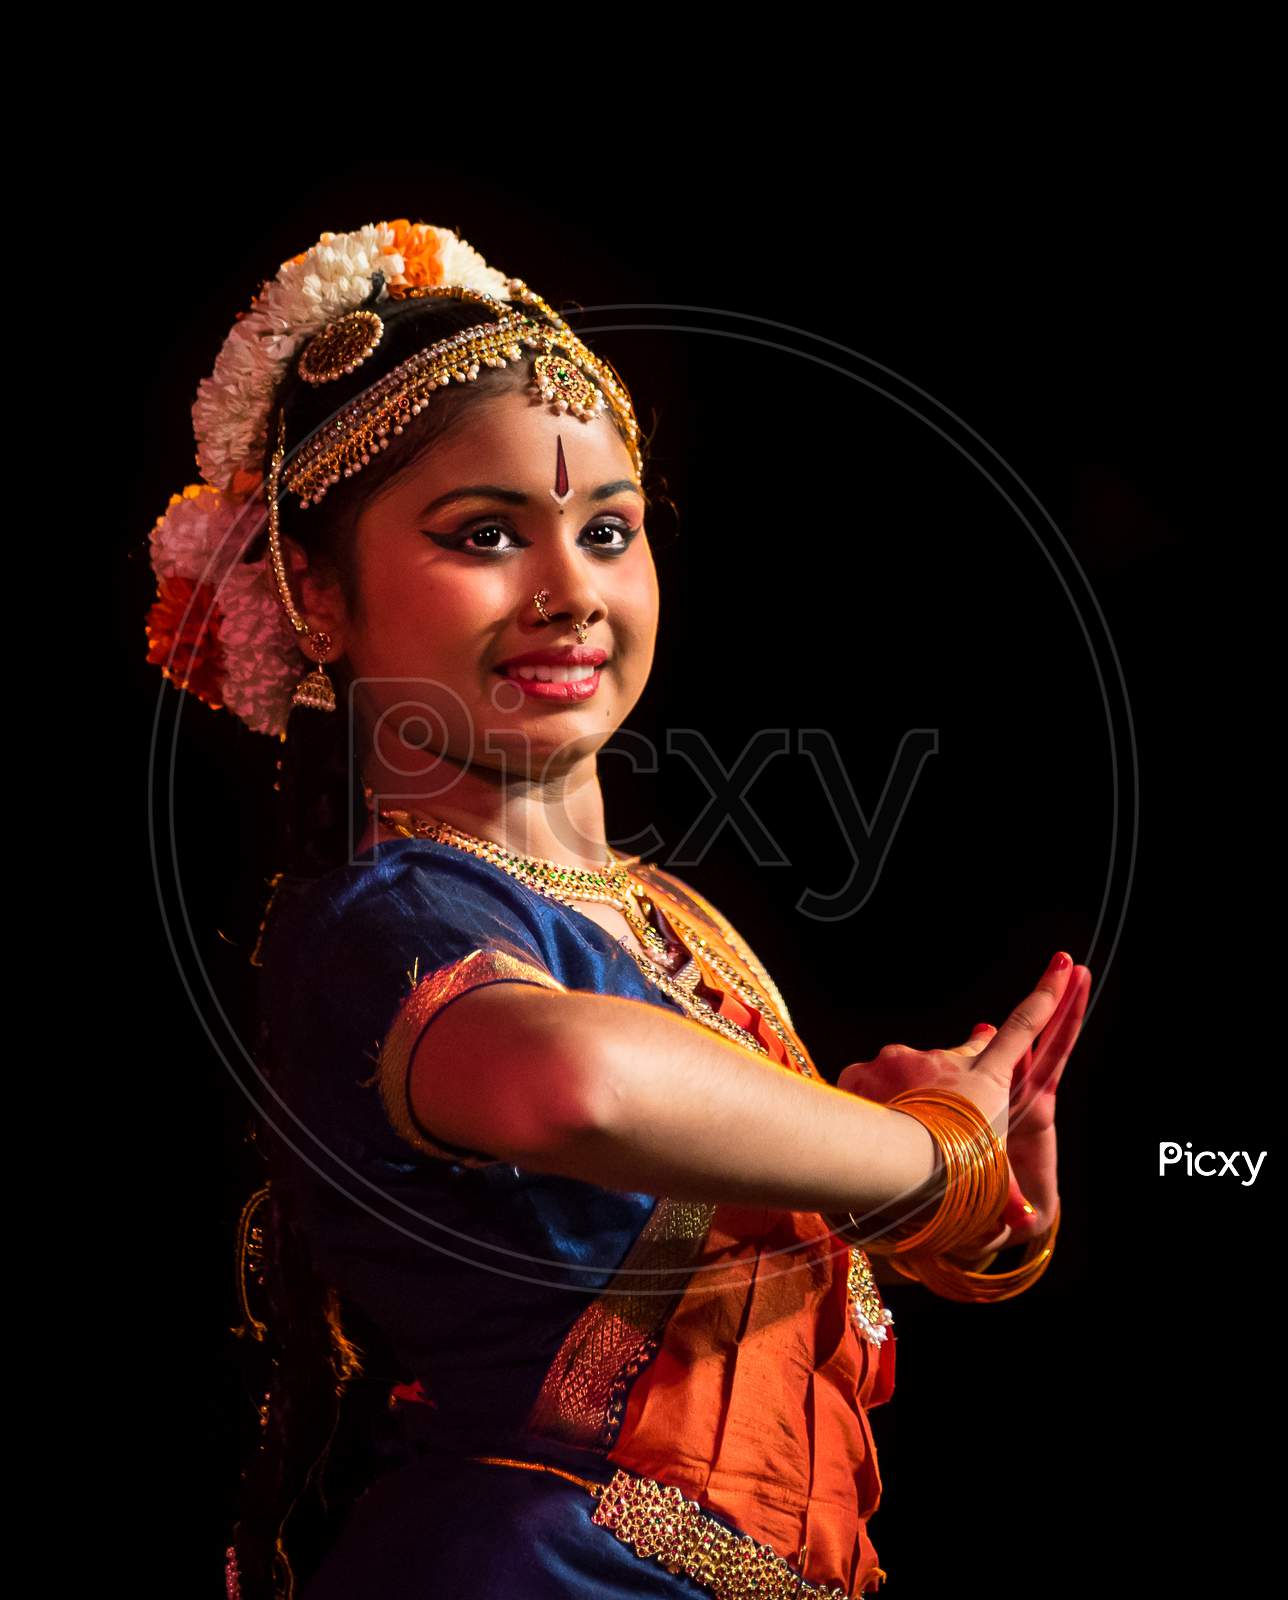 Indian Classical Dancer Performing On Stage